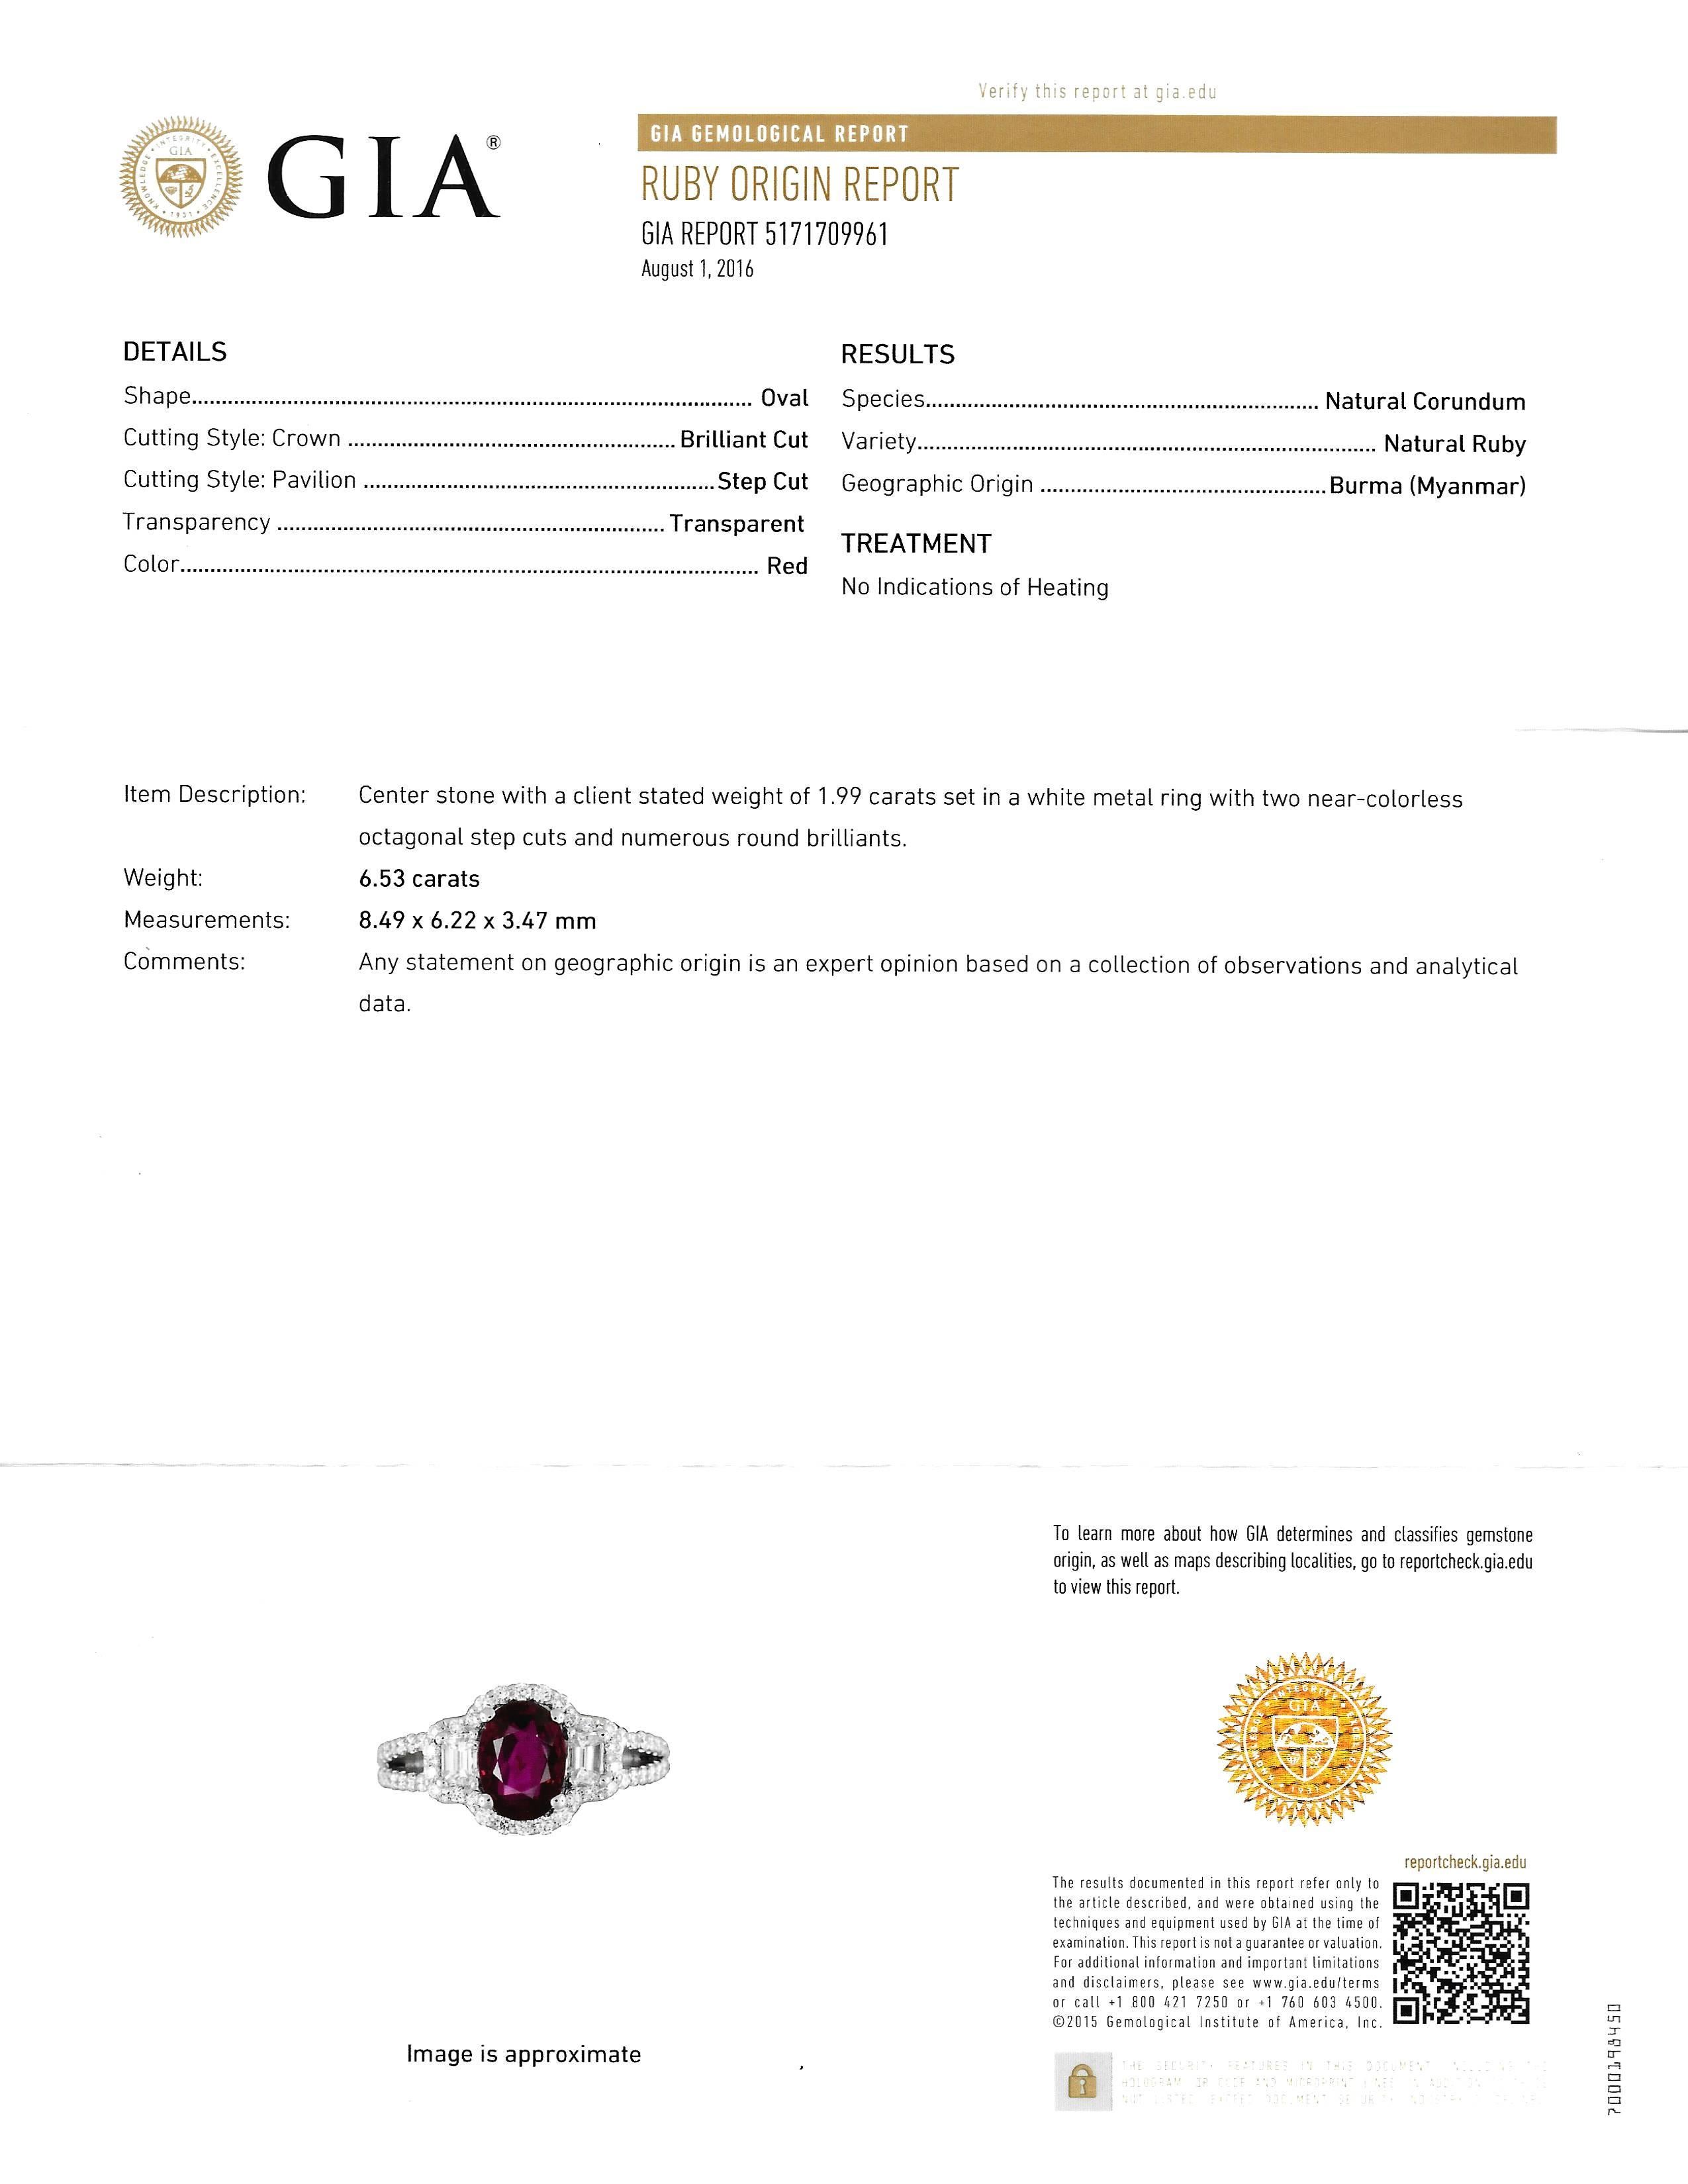 GIA certified Country of Origin Myanmar, one of a kind cocktail ring
The no-heat ruby was mined in the is Magok mines 
Burma ruby weighing 1.95 carats 
Two emerald cut diamonds weighing 0.40 carat
Surrounded by pave-set diamonds weighing 0.80 carats